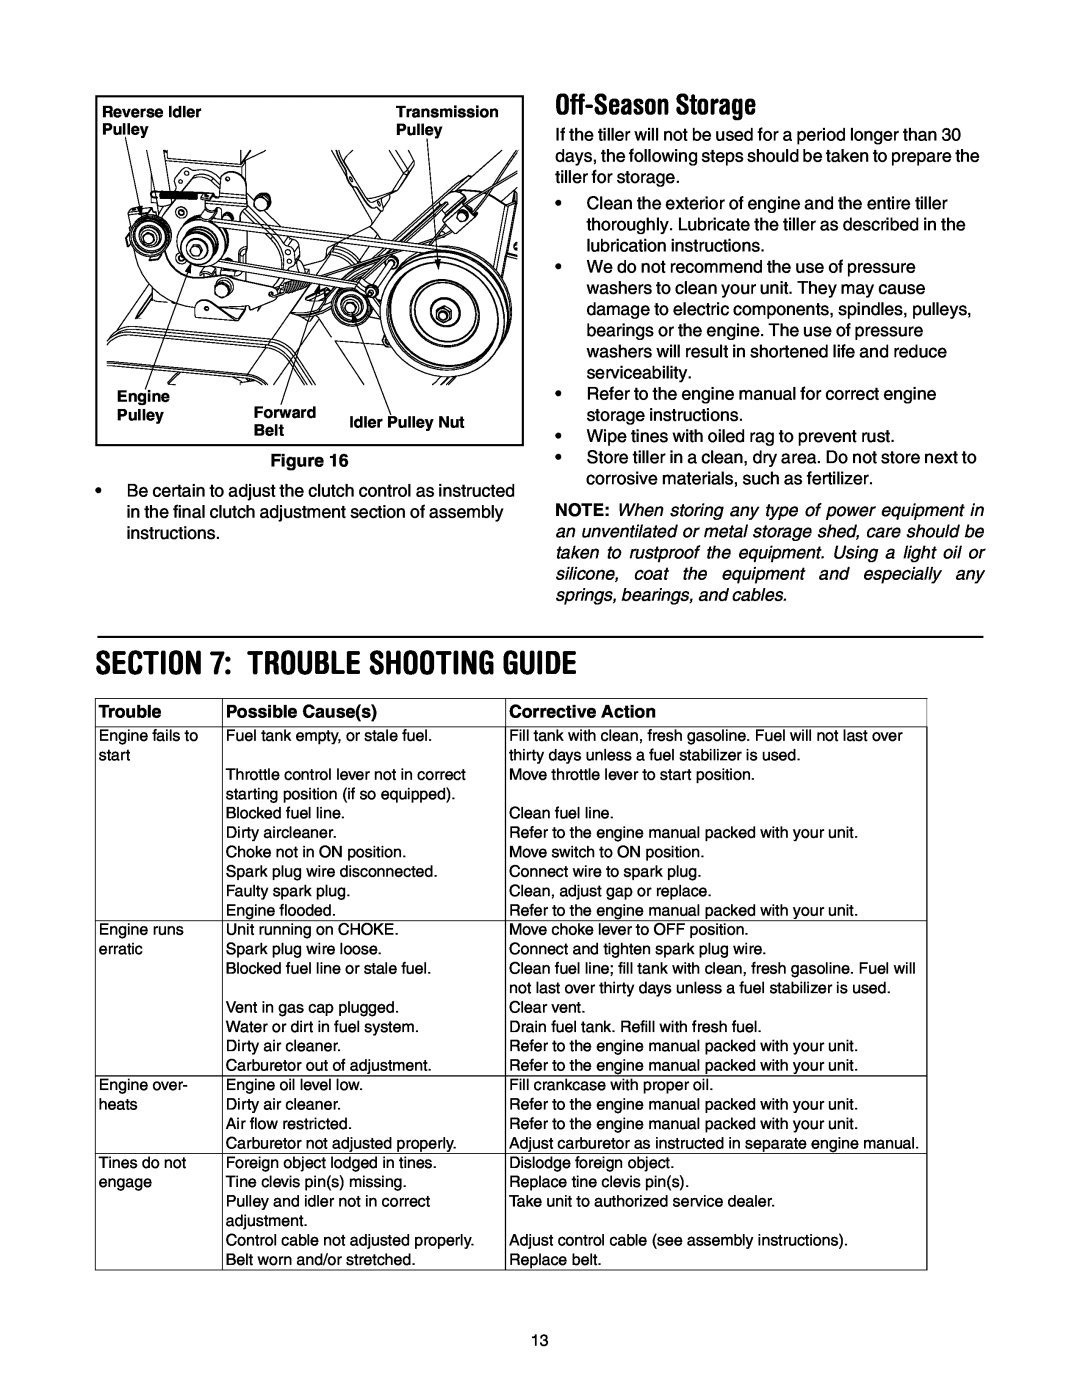 MTD 393 manual Trouble Shooting Guide, Off-Season Storage, Possible Causes, Corrective Action 